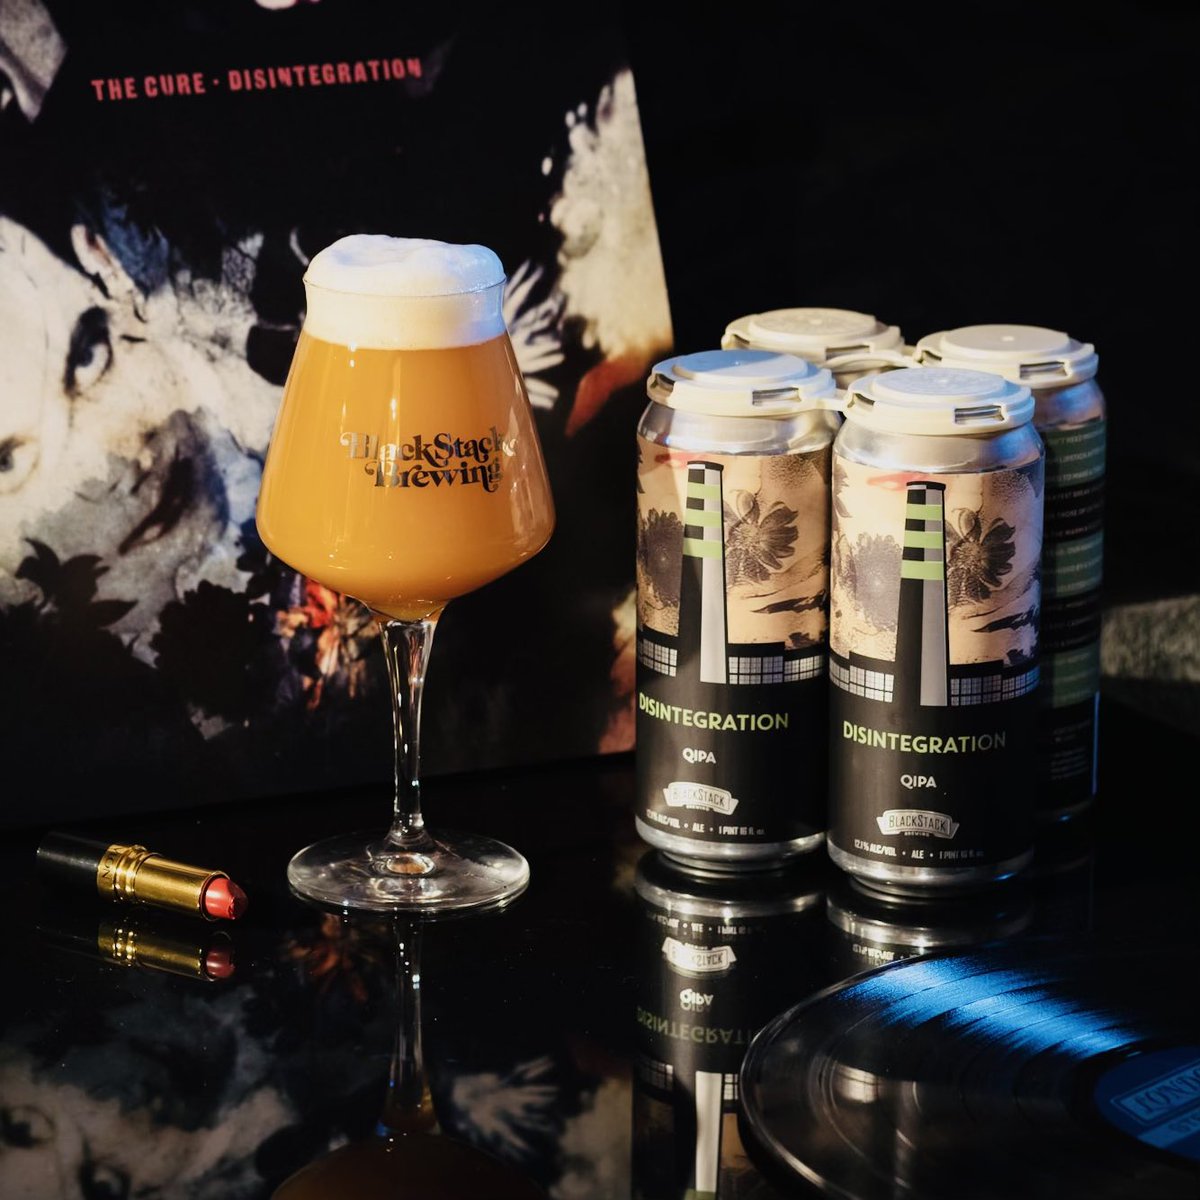 🥀💄DISINTEGRATION💄🥀 QIPA (12.1%) Our Hand Selected Strata surrounded by a supportive group of Citra Cryo, Sabro Cryo, Mosaic Cryo, Amarillo Cryo, Azacca Cryo, Cashmere Cryo, Idaho 7 Cryo & Ekuanot Cryo. Boys may not cry, but they certainly do Cryo… Get lost in this one🙏